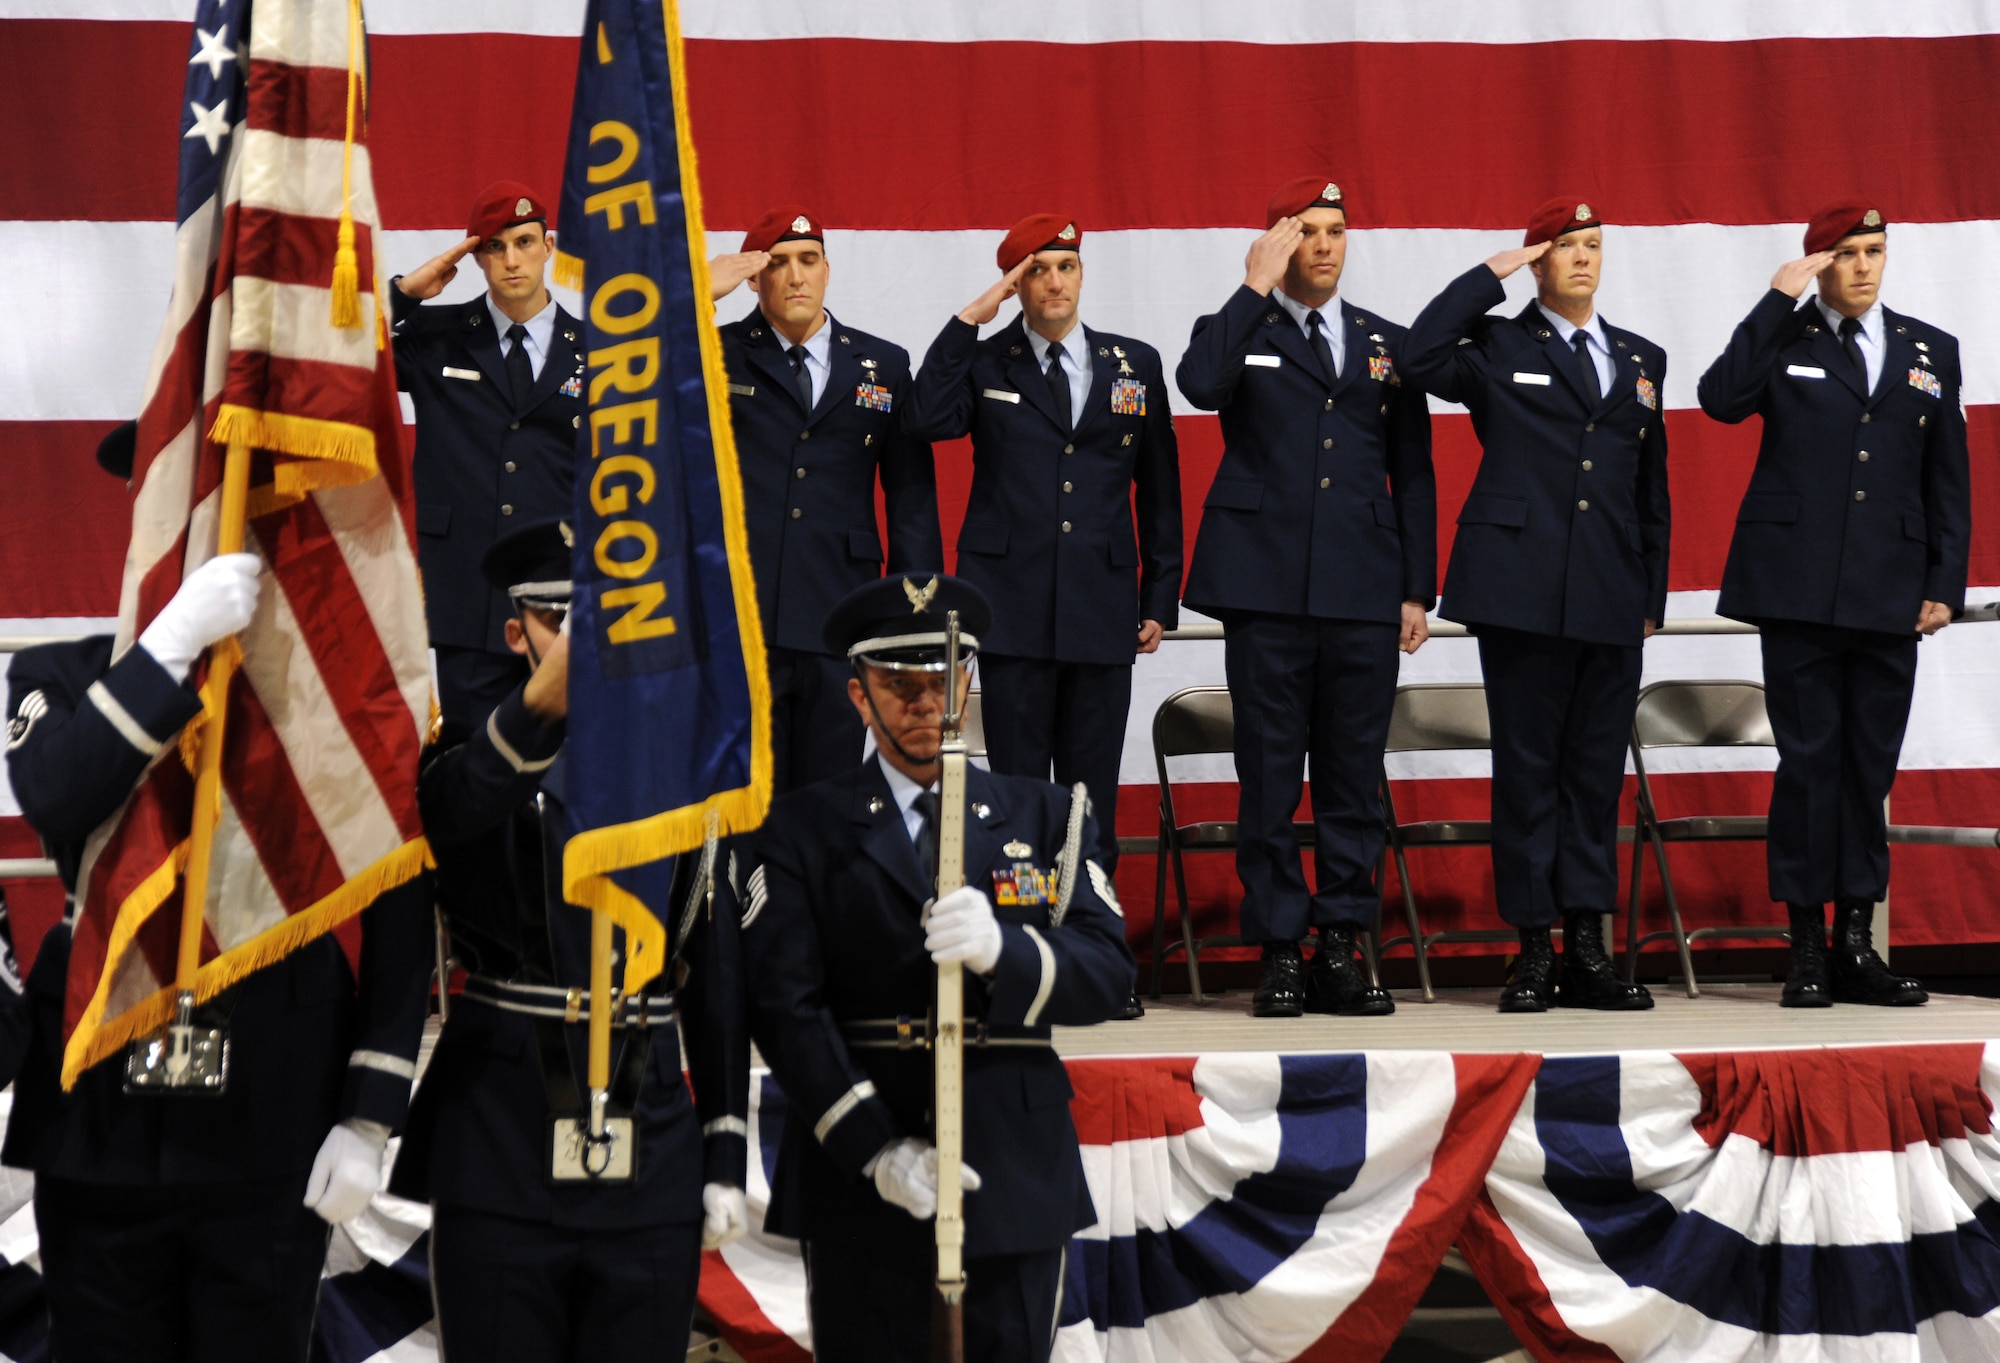 Members of the Oregon Air National Guard's 125th Special Tactics Squadron salute the honor guard during the posting of colors at a ceremony held at the Portland Air National Guard Base, Portland, Ore., Jan. 23. The ceremony was to honor the group with five Bronze Star Medals and one Purple Heart medal.  The Airmen earned the medals during recent deployments to the Middle East.  From left to right are; Staff Sgt. David A. Albright, Senior Airman Chadwick J. Boles, Master Sgt. Scott A. Geisser, Tech. Sgt. Jeffery A. Dolezal, Staff Sgt. Jacob M. Guffy and Tech. Sgt. Douglas J. Matthews. U.S. Air Force Lt. Gen. Eric E. Fiel, commander of Air Force Special Operations Command, flew in from his headquarters at Hulburt Field, Fla., for the ceremony.  (Oregon Air National Guard photo by Tech. Sgt. John Hughel, 142nd Fighter Wing Public Affairs/Released)